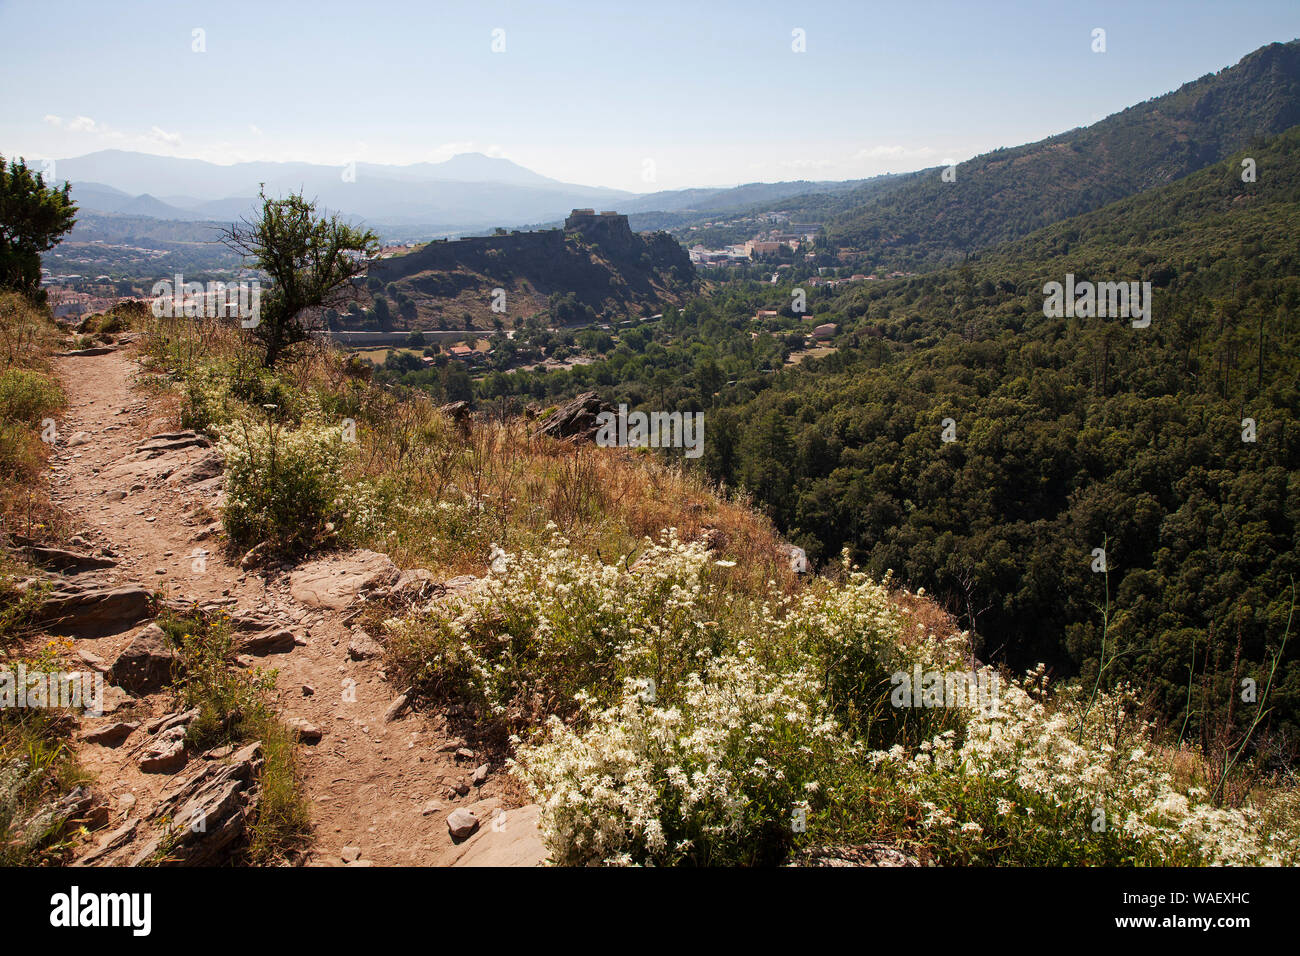 Footpath in the Tavignanu Valley with the citadel of Corte beyond, Regional Natural Park of Corsica, France, July 2018 Stock Photo